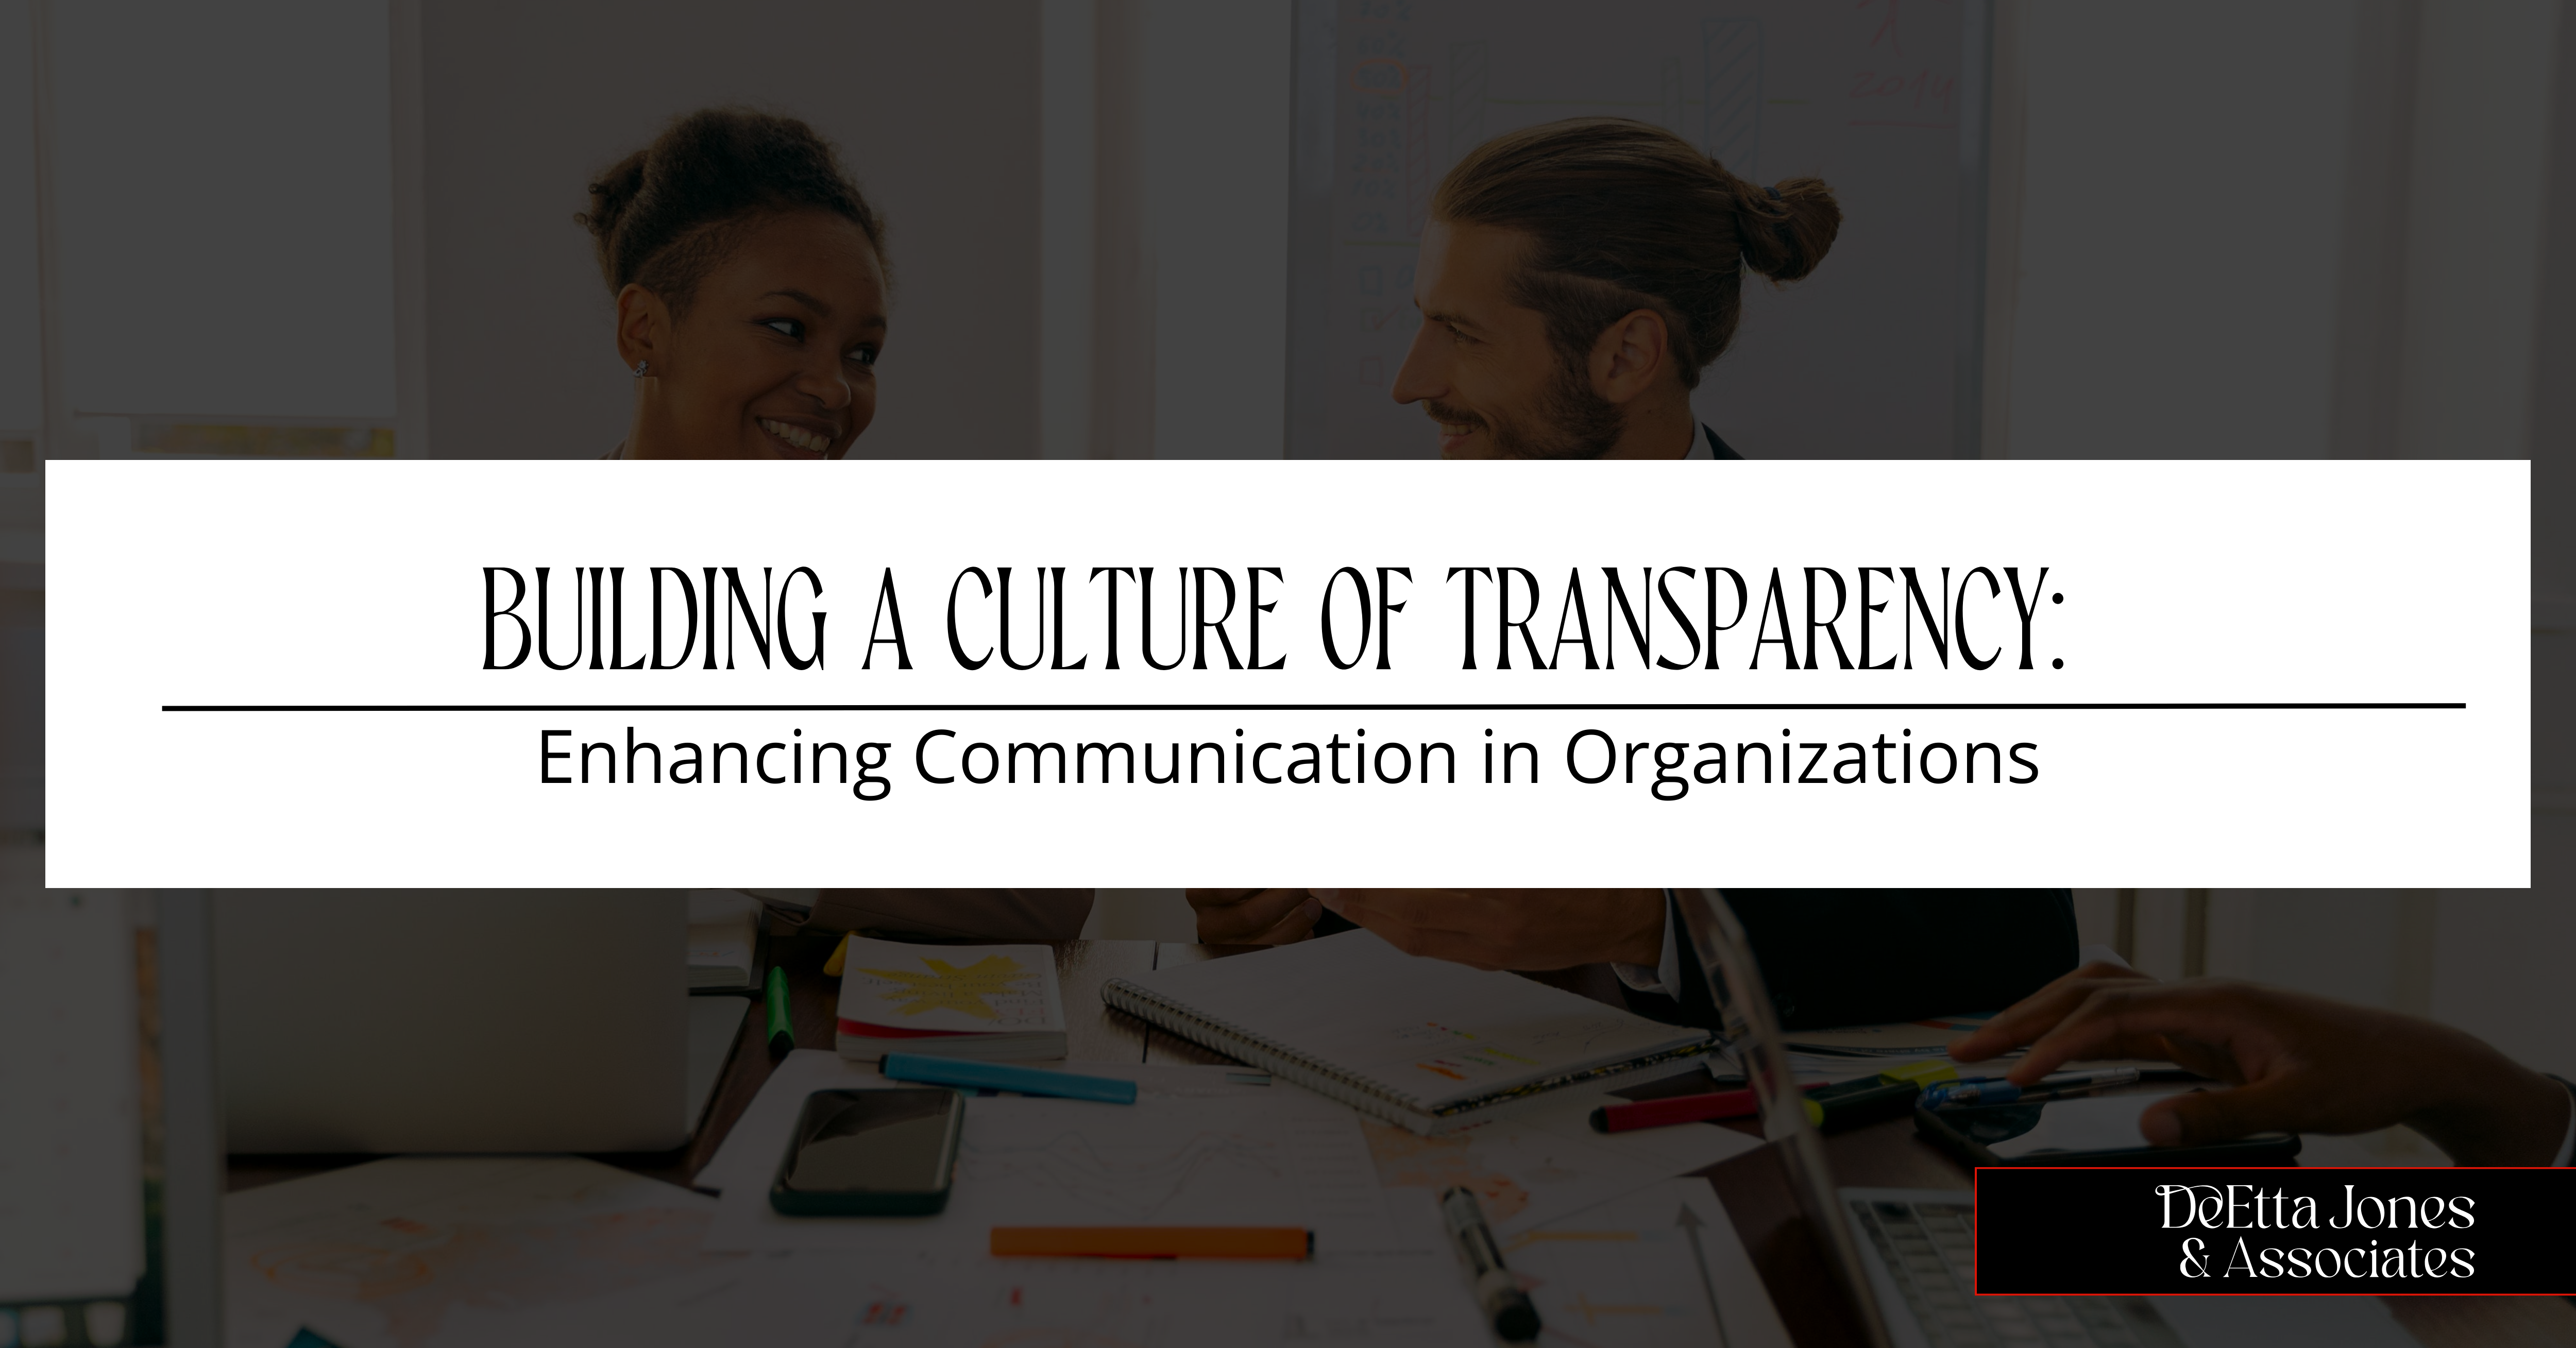 Building a Culture of Transparency: Enhancing Communication in Organizations